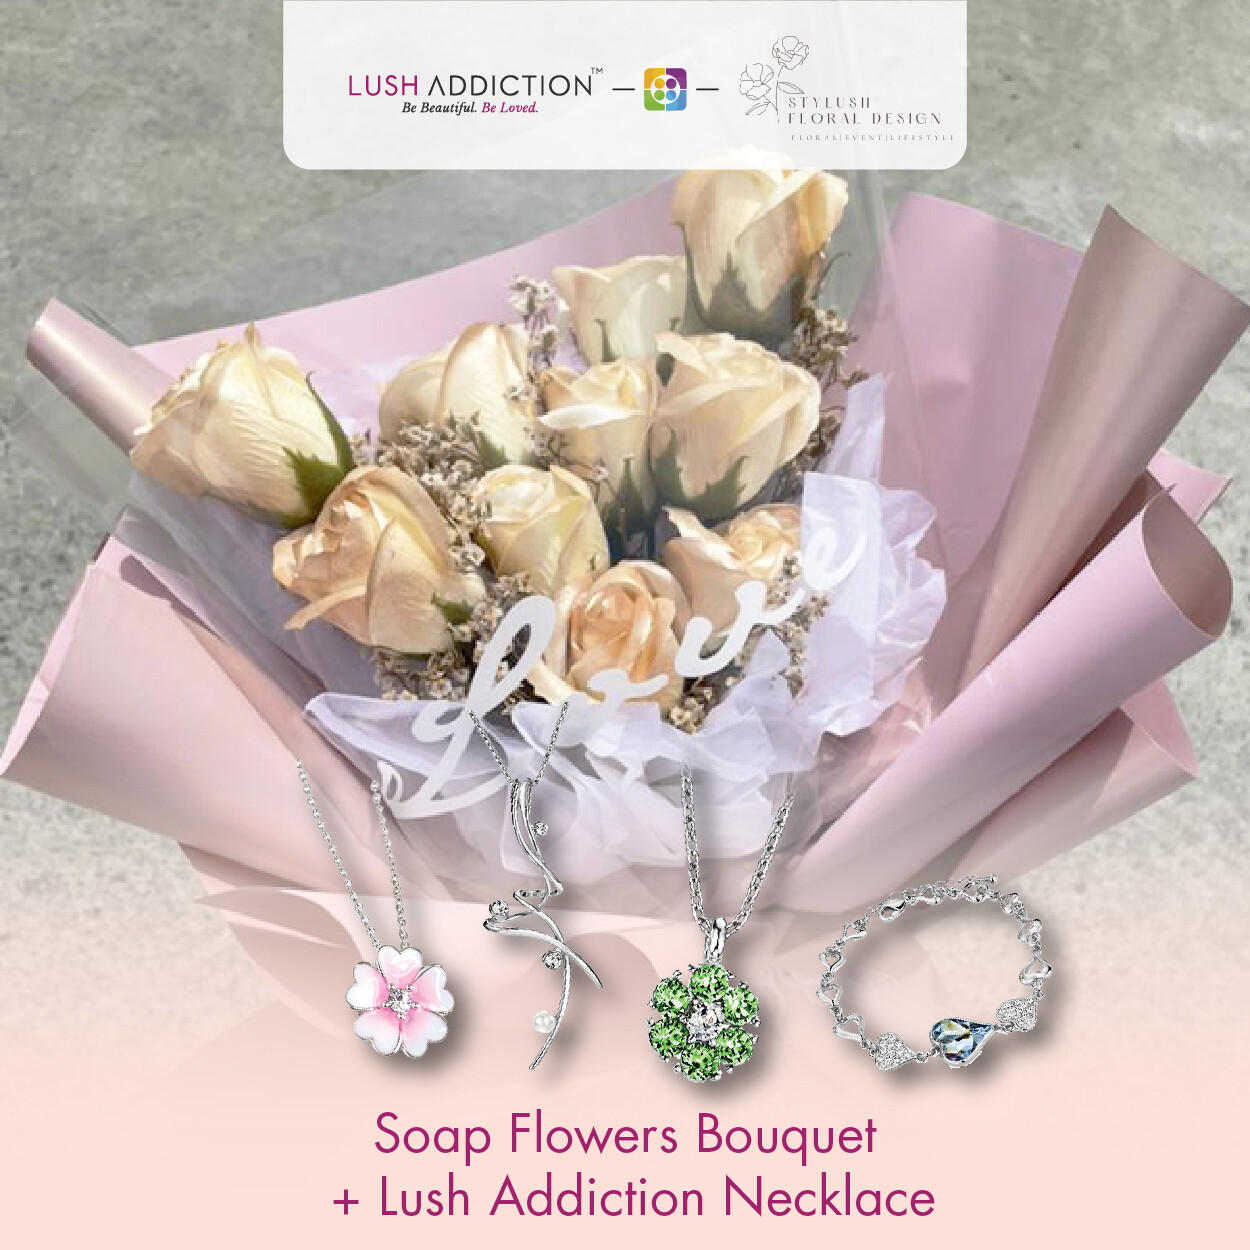 Soap Flowers Bouquet + Lush Addiction Necklace (By: Stylush Studio Floral Design from Kota Kinabalu)